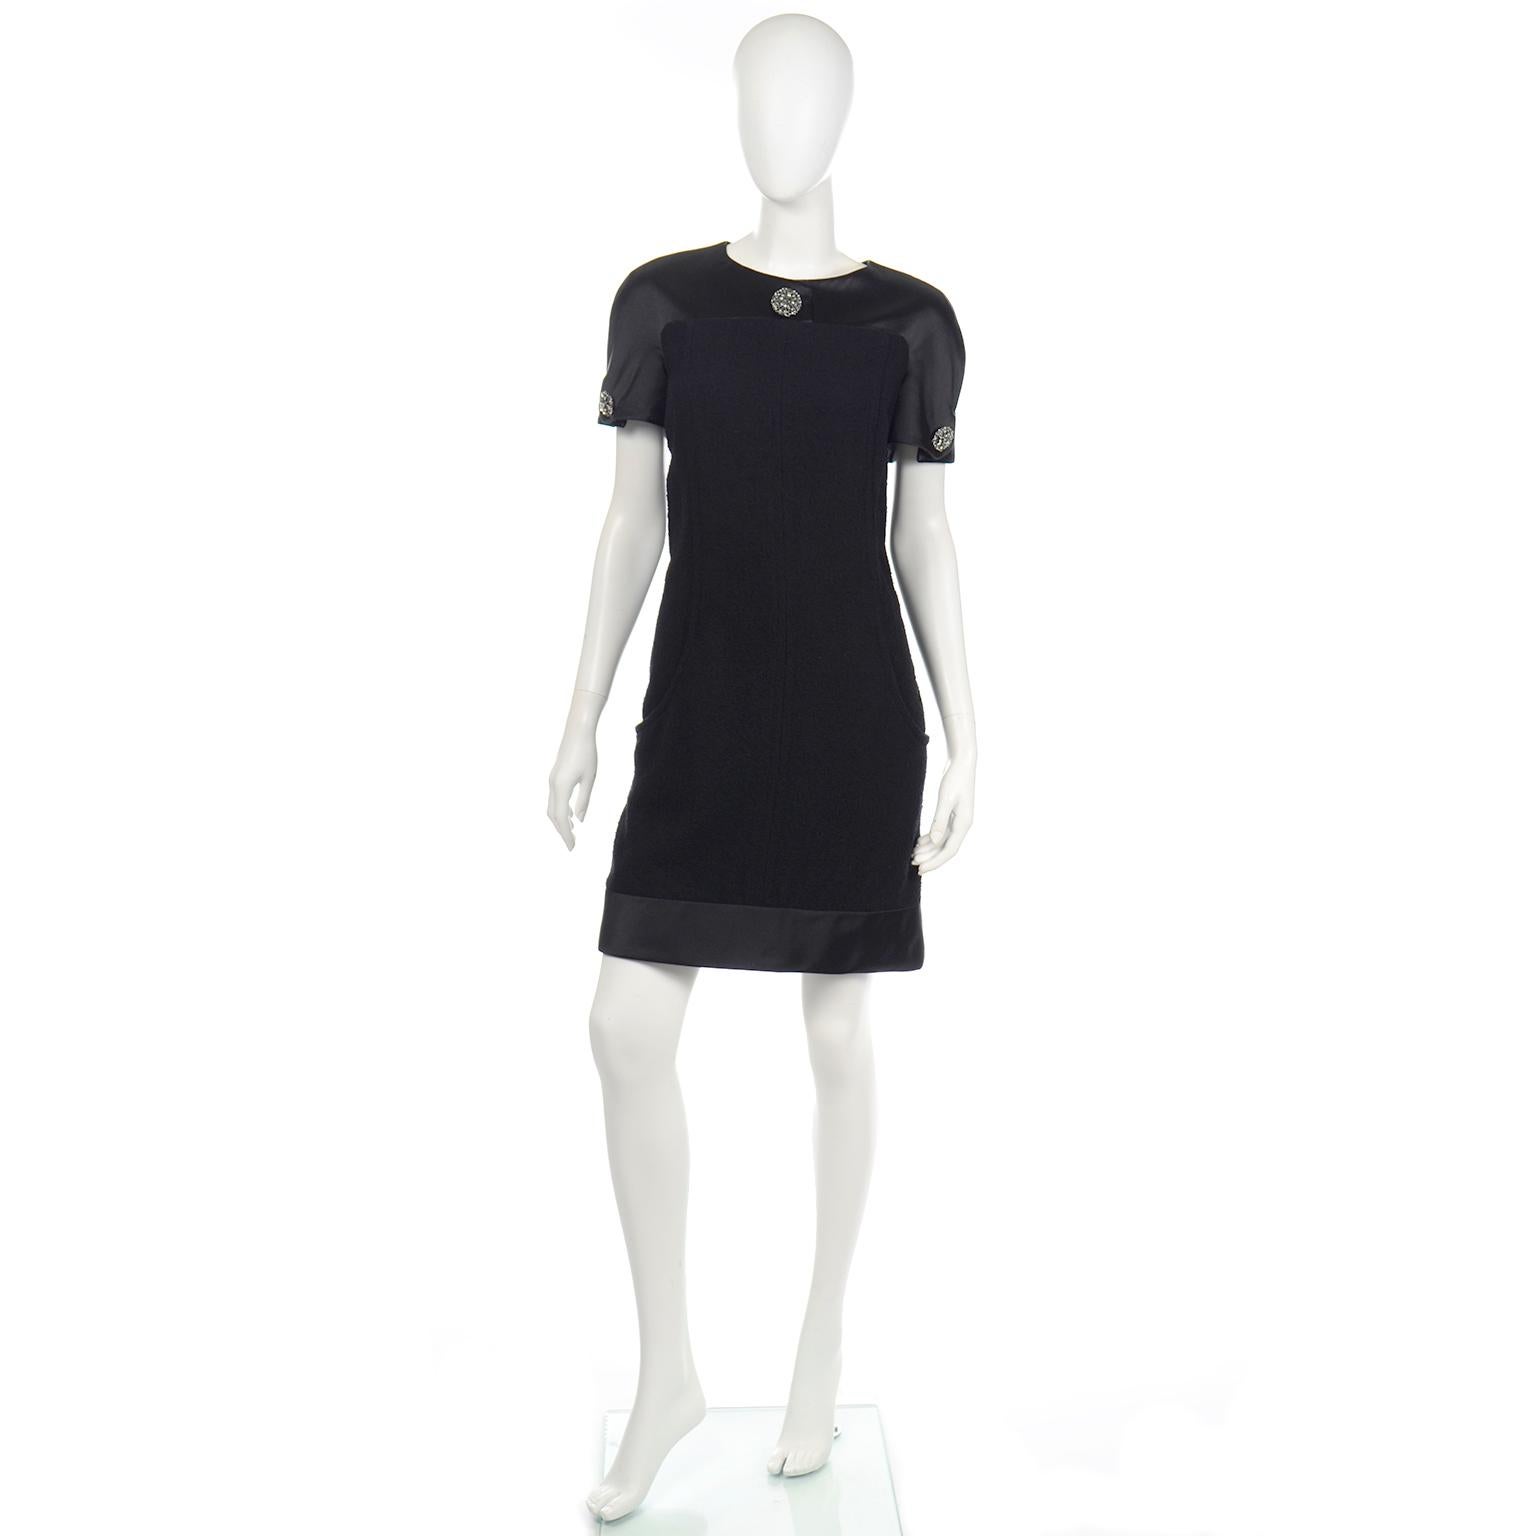 This is a lovely Chanel Fall 2015 dress in black bouclé wool and silk. The body of the dress is in bouclé wool and black silk satin is found at the hem and on the upper bodice and sleeves. There are beautiful gripoix buttons including one in the